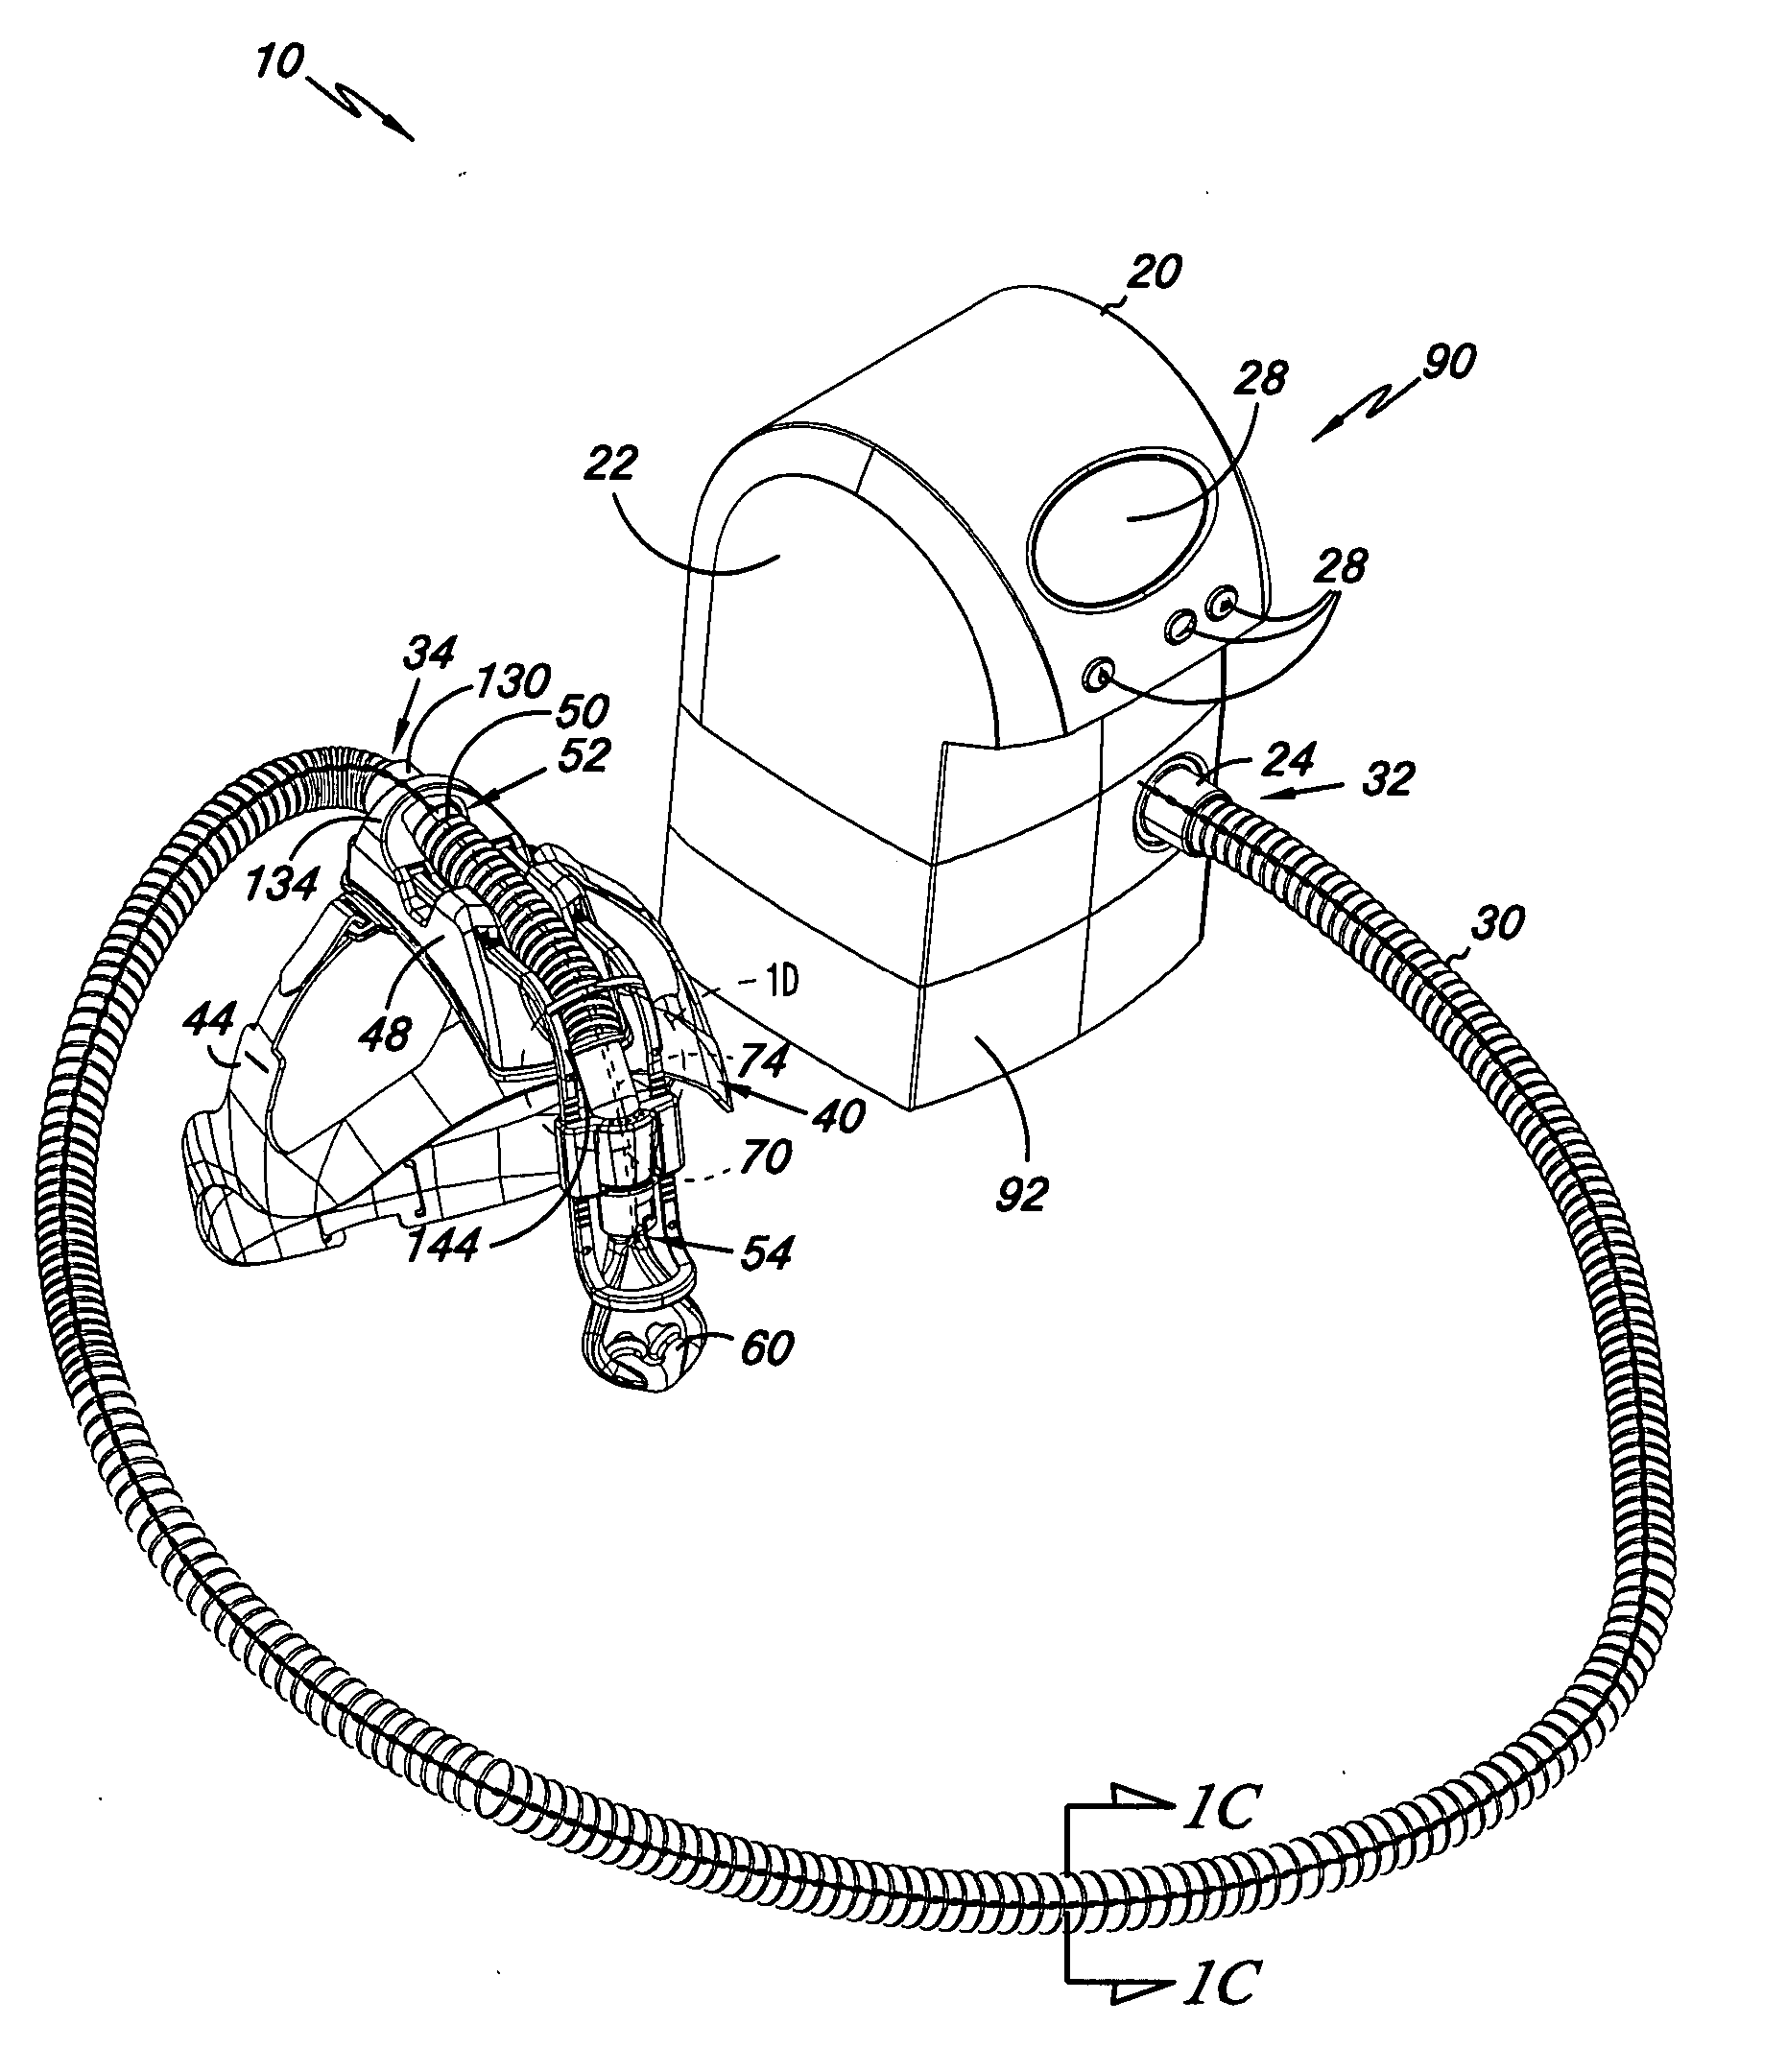 Apparatus and methods for providing humidity in respiratory therapy